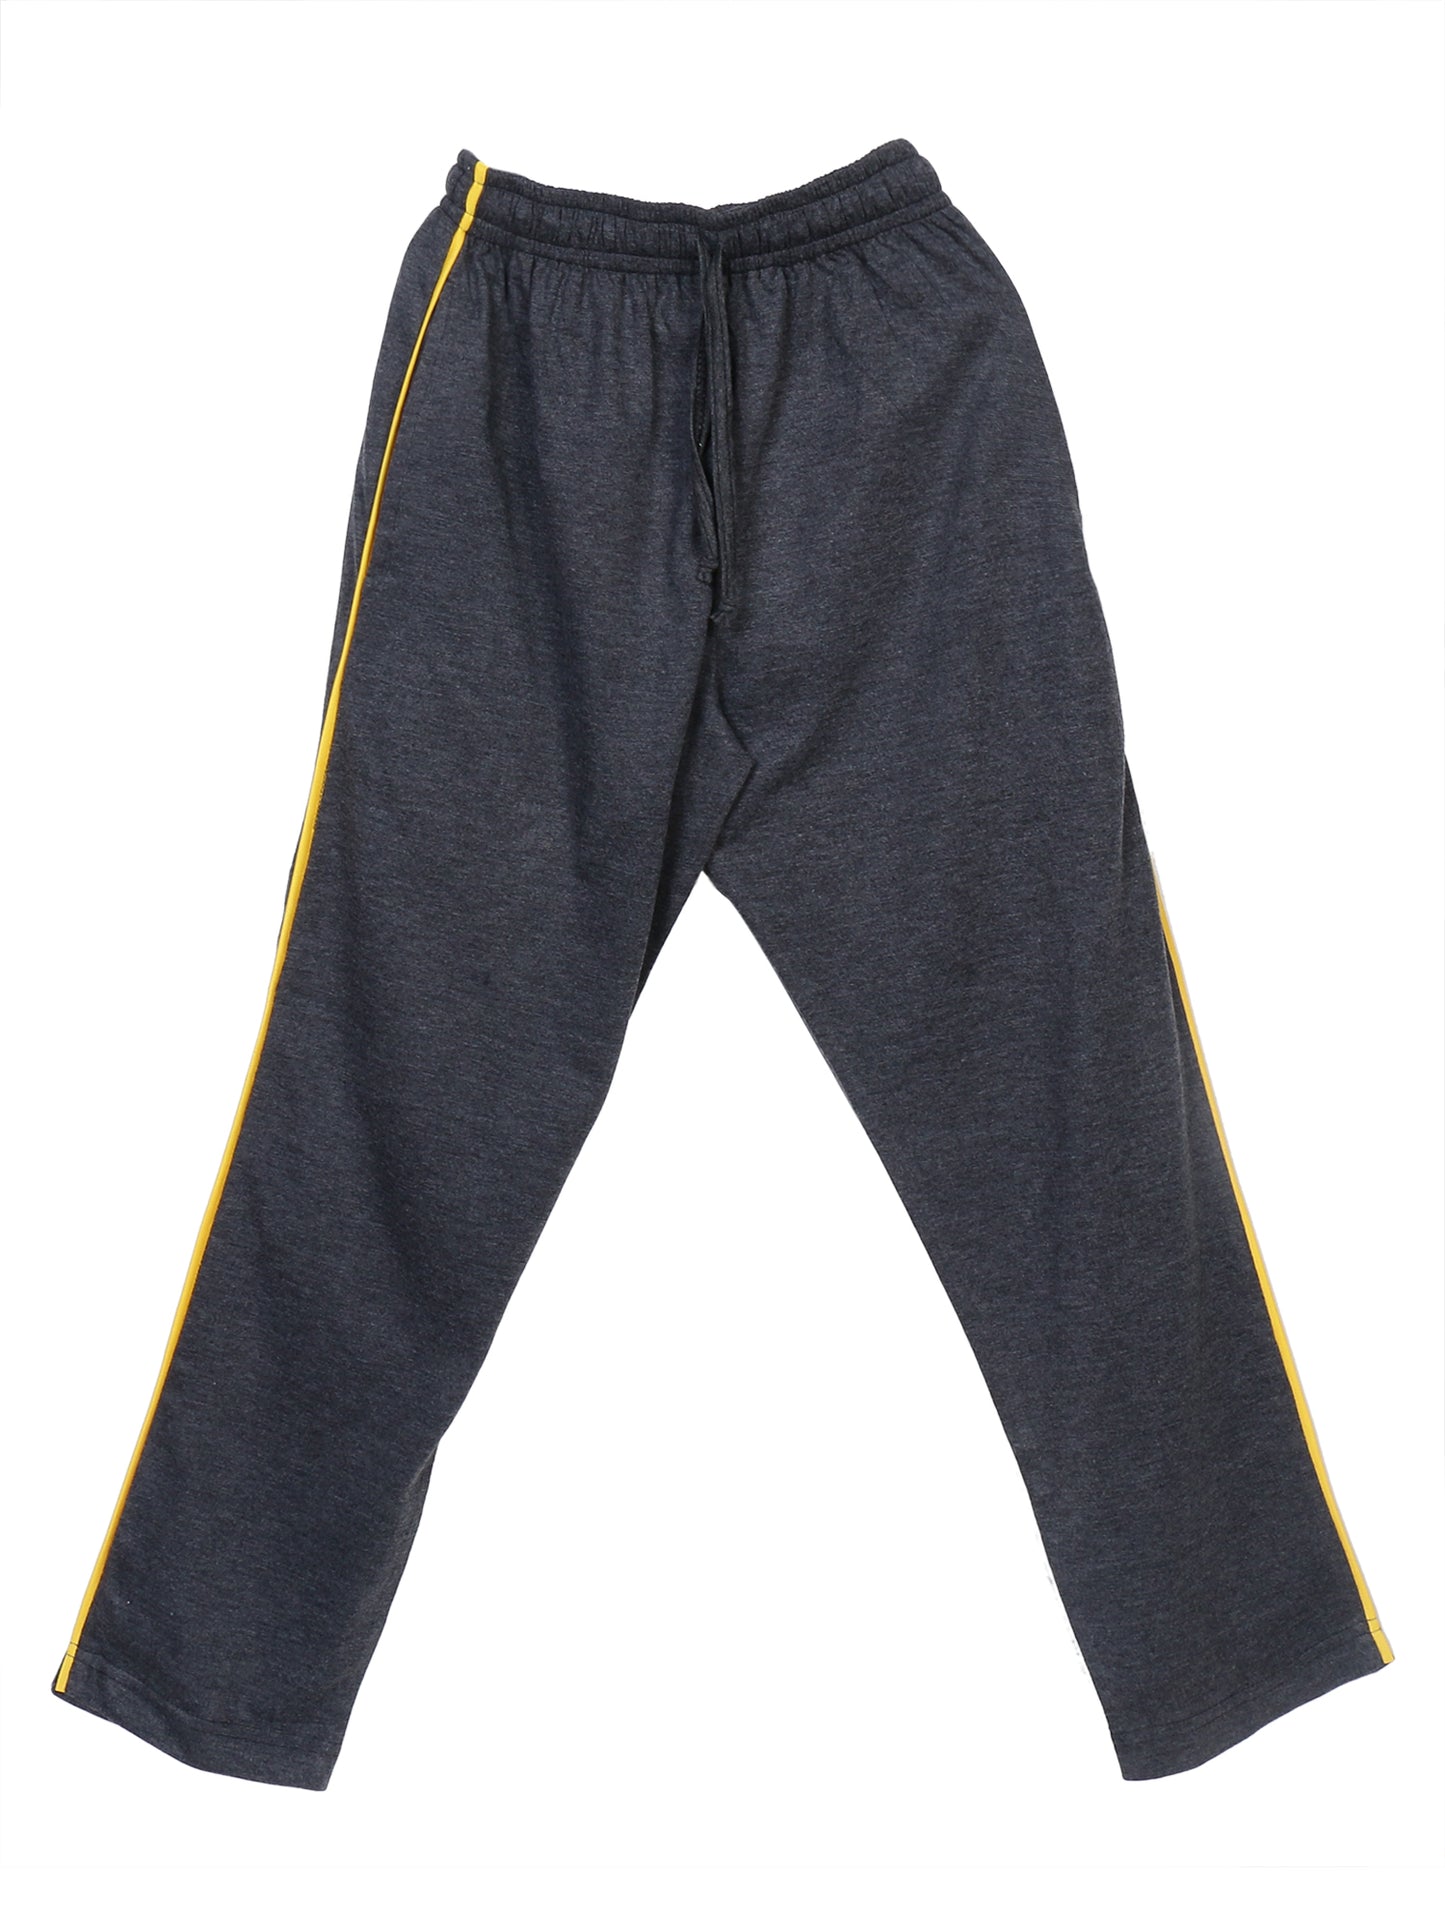 Neo Garments Boy's Cotton Track Pant | CARBON | SIZE FROM 1YRS TO 15YRS.